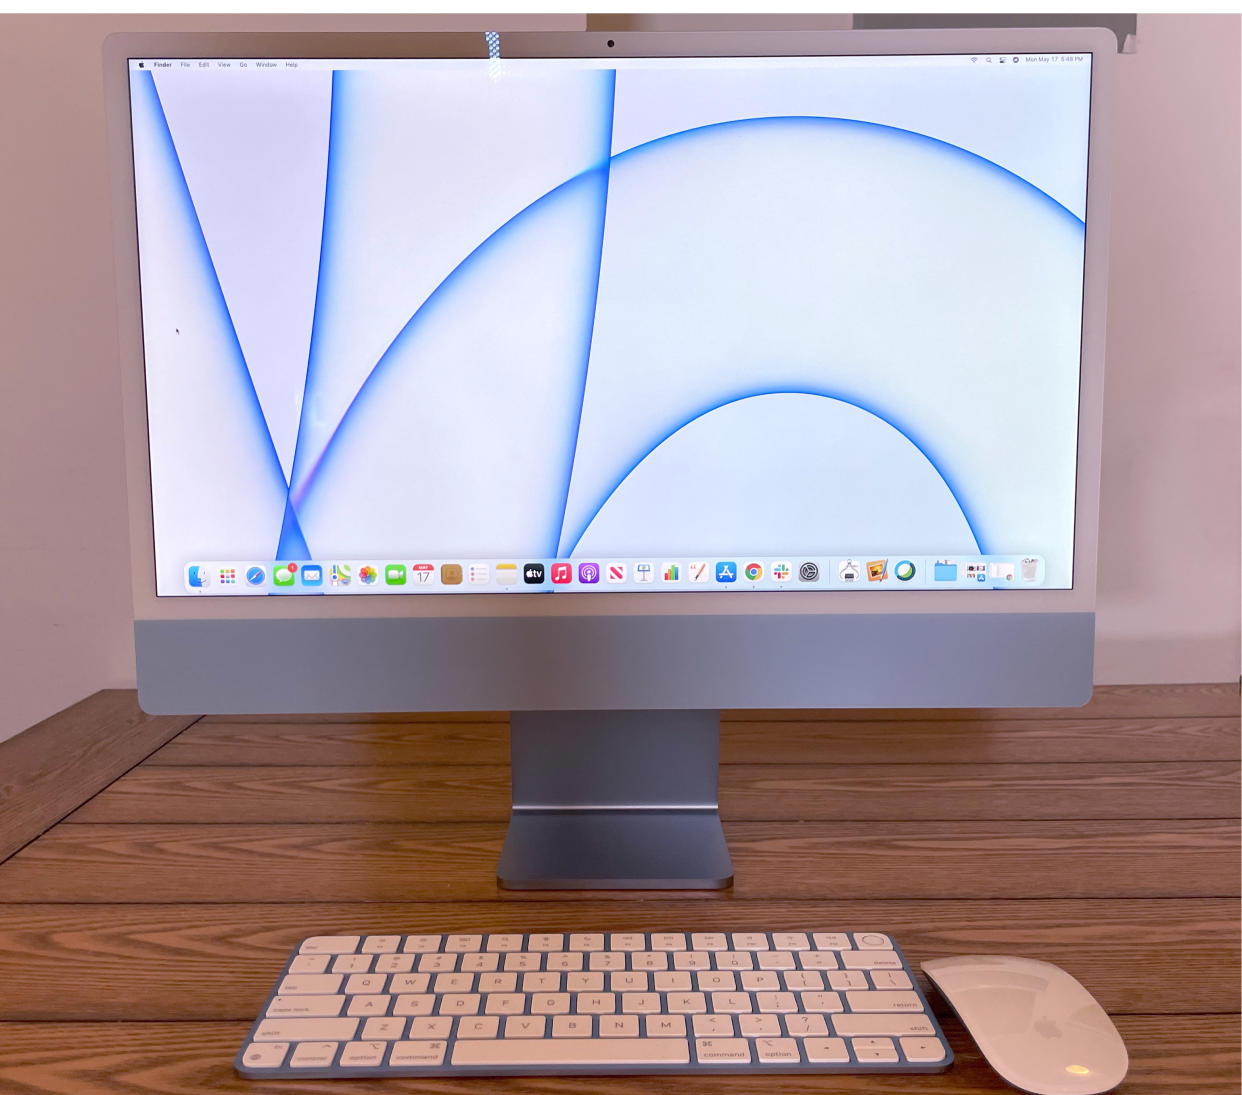 The iMac offers a minimalistic aesthetic thanks to its single power cable. (Image: Howley)